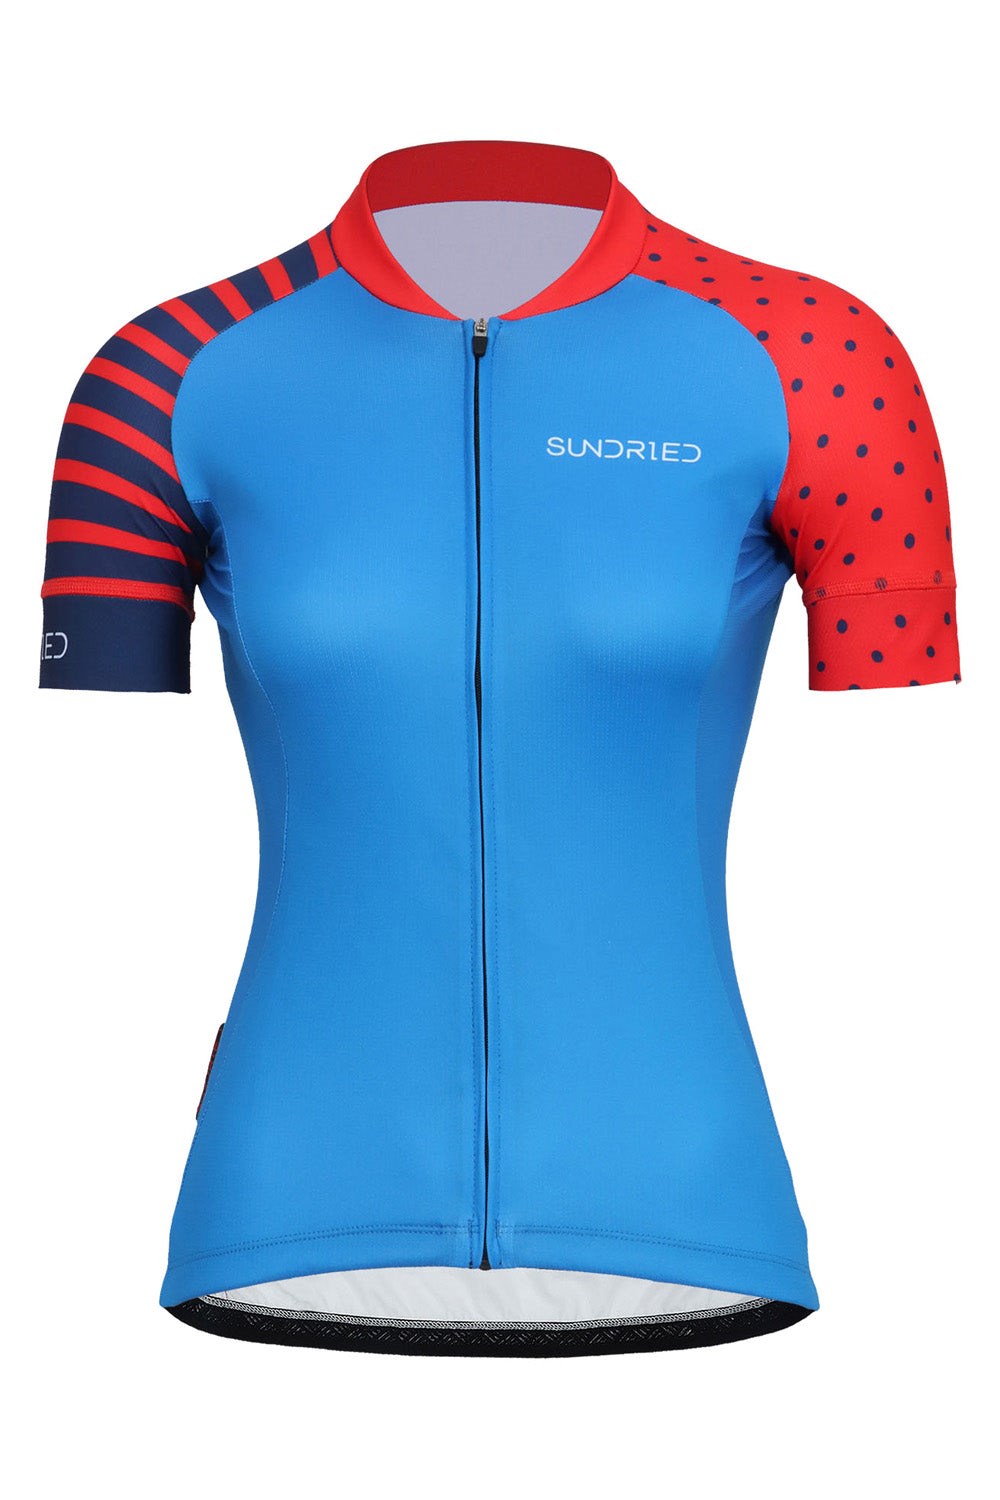 Spots & Stripes Womens Cycle Jersey -